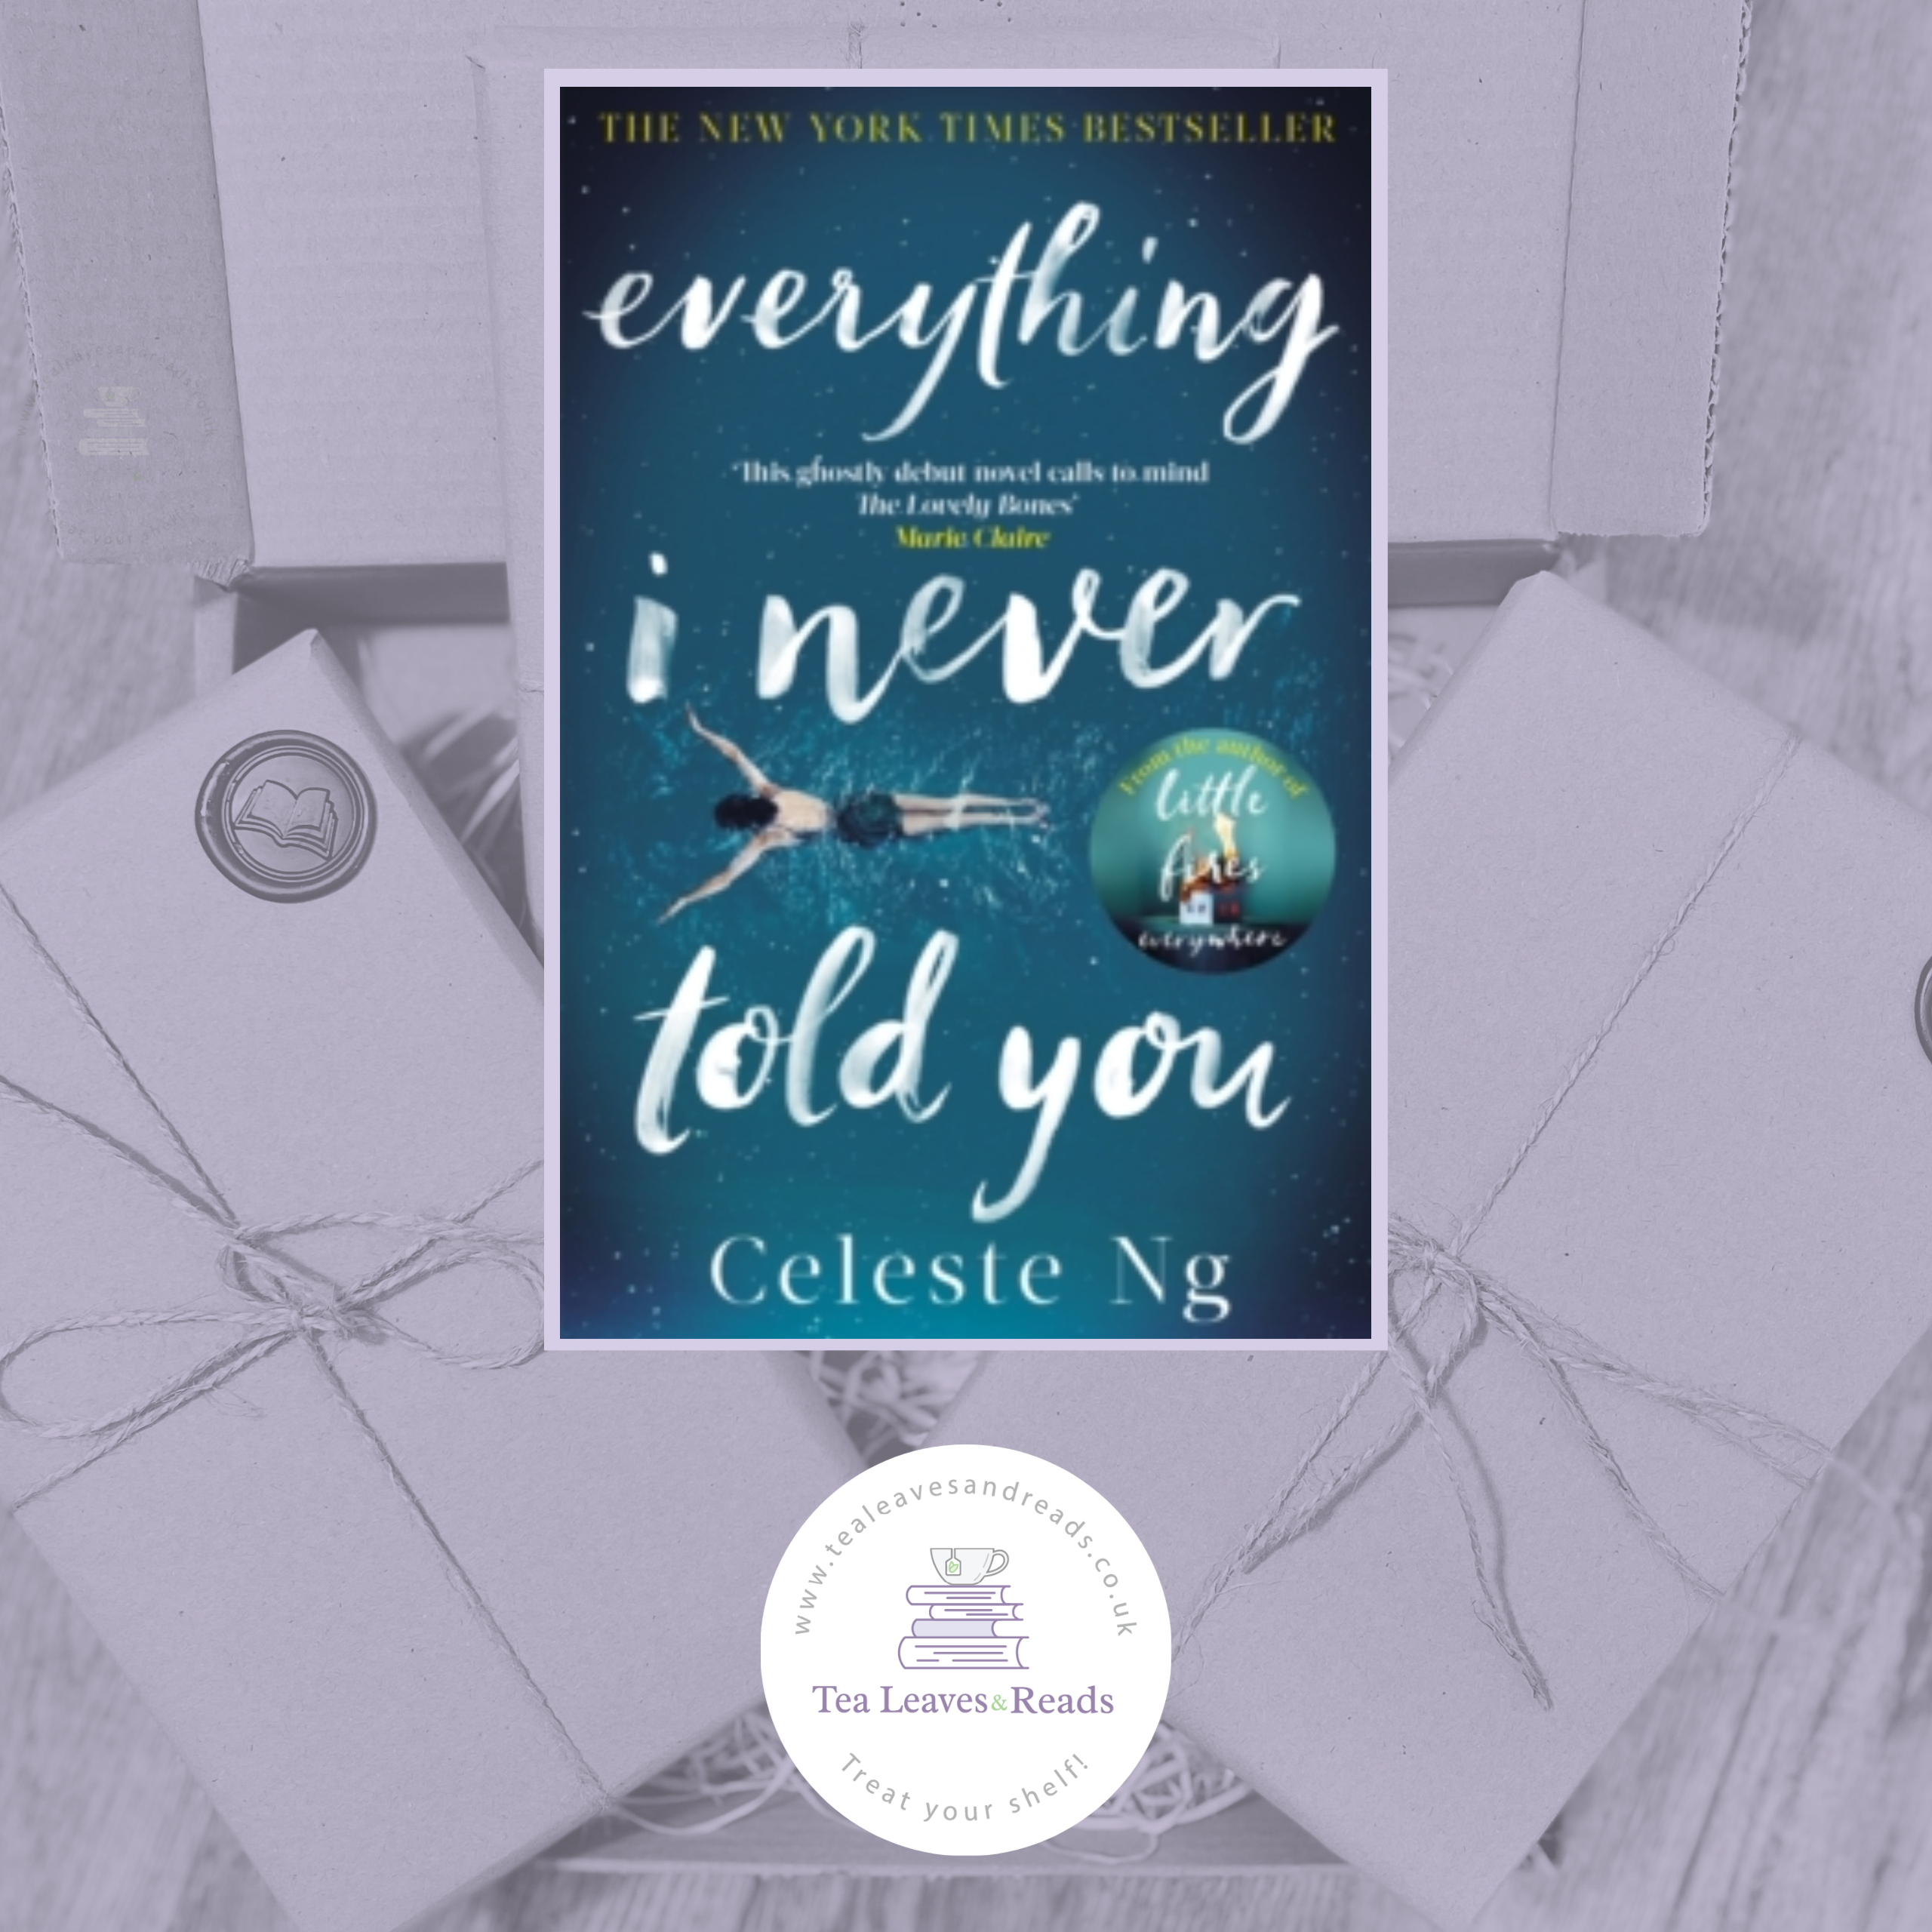 Everything　by　You　Told　Reads　I　Leaves　Ng　Never　Celeste　Tea